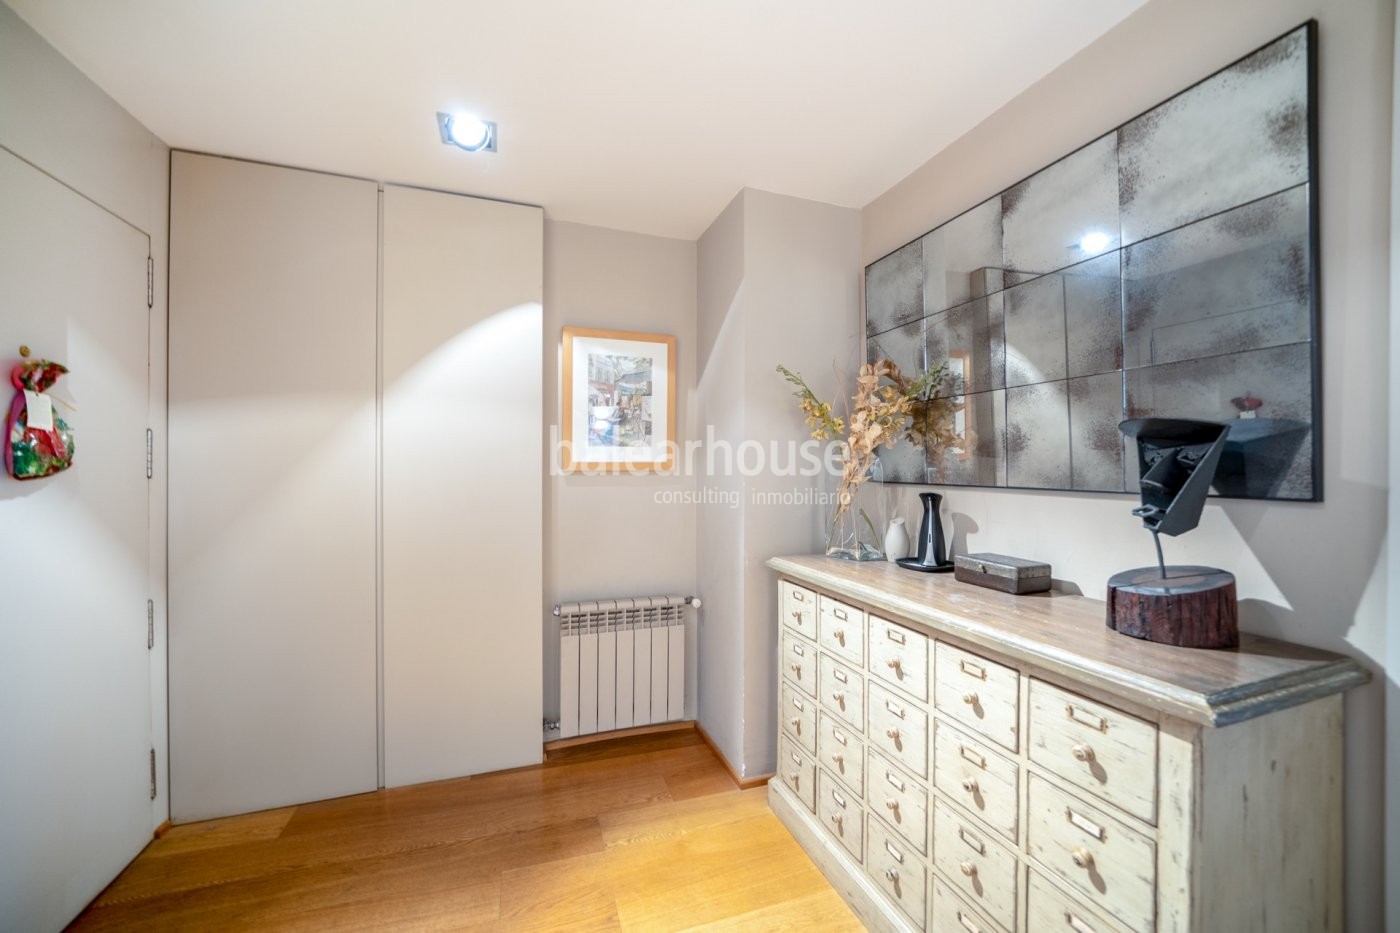 Great flat full of light, high quality and comfort in the quiet area of Son Armadans in Palma.